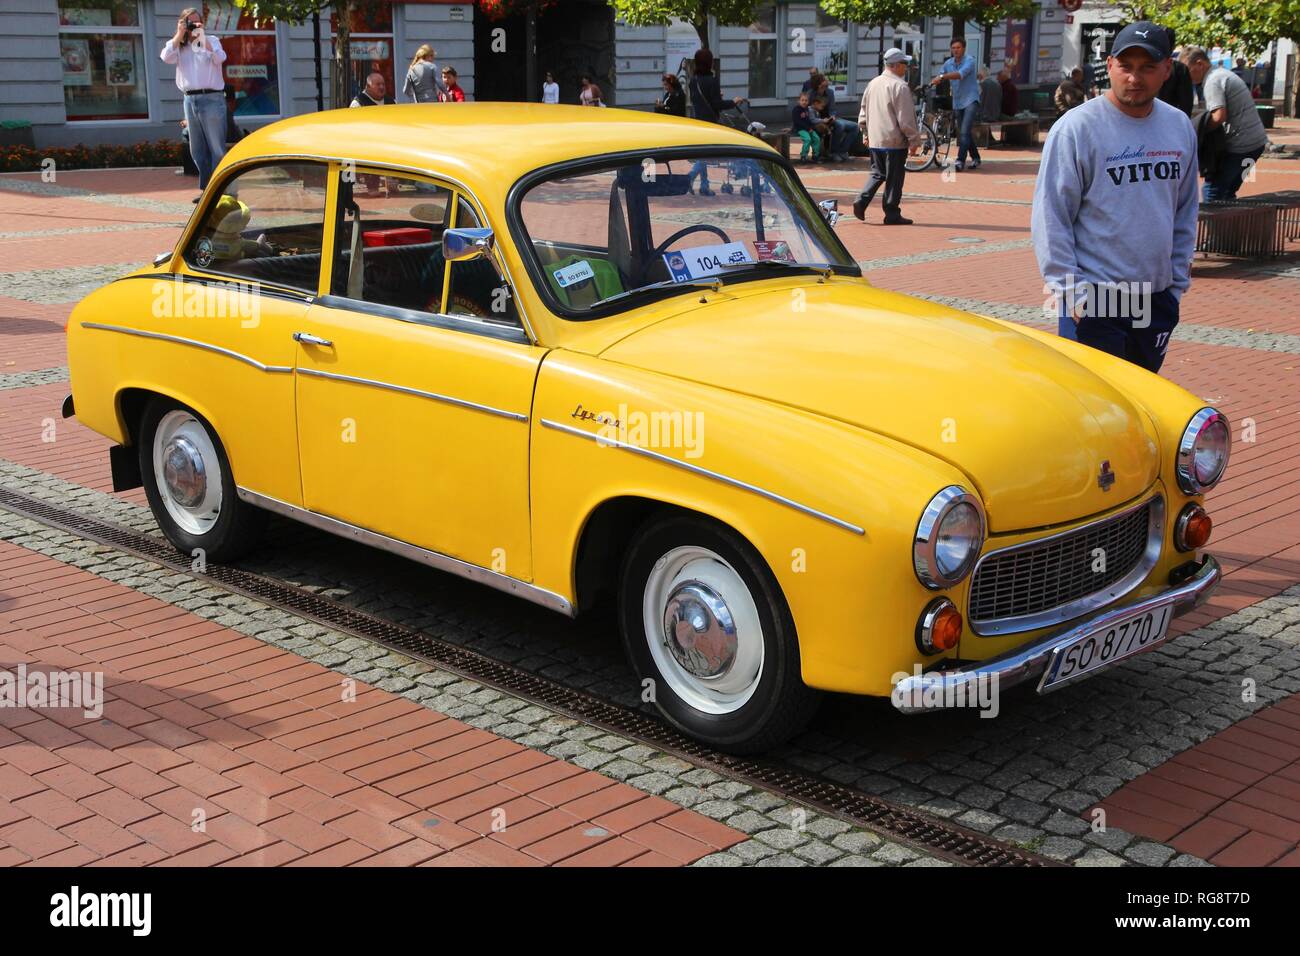 BYTOM, POLAND - SEPTEMBER 12, 2015: People admire FSO Syrena 105 during 12th Historic Vehicle Rally in Bytom. The annual vehicle parade is one of main Stock Photo